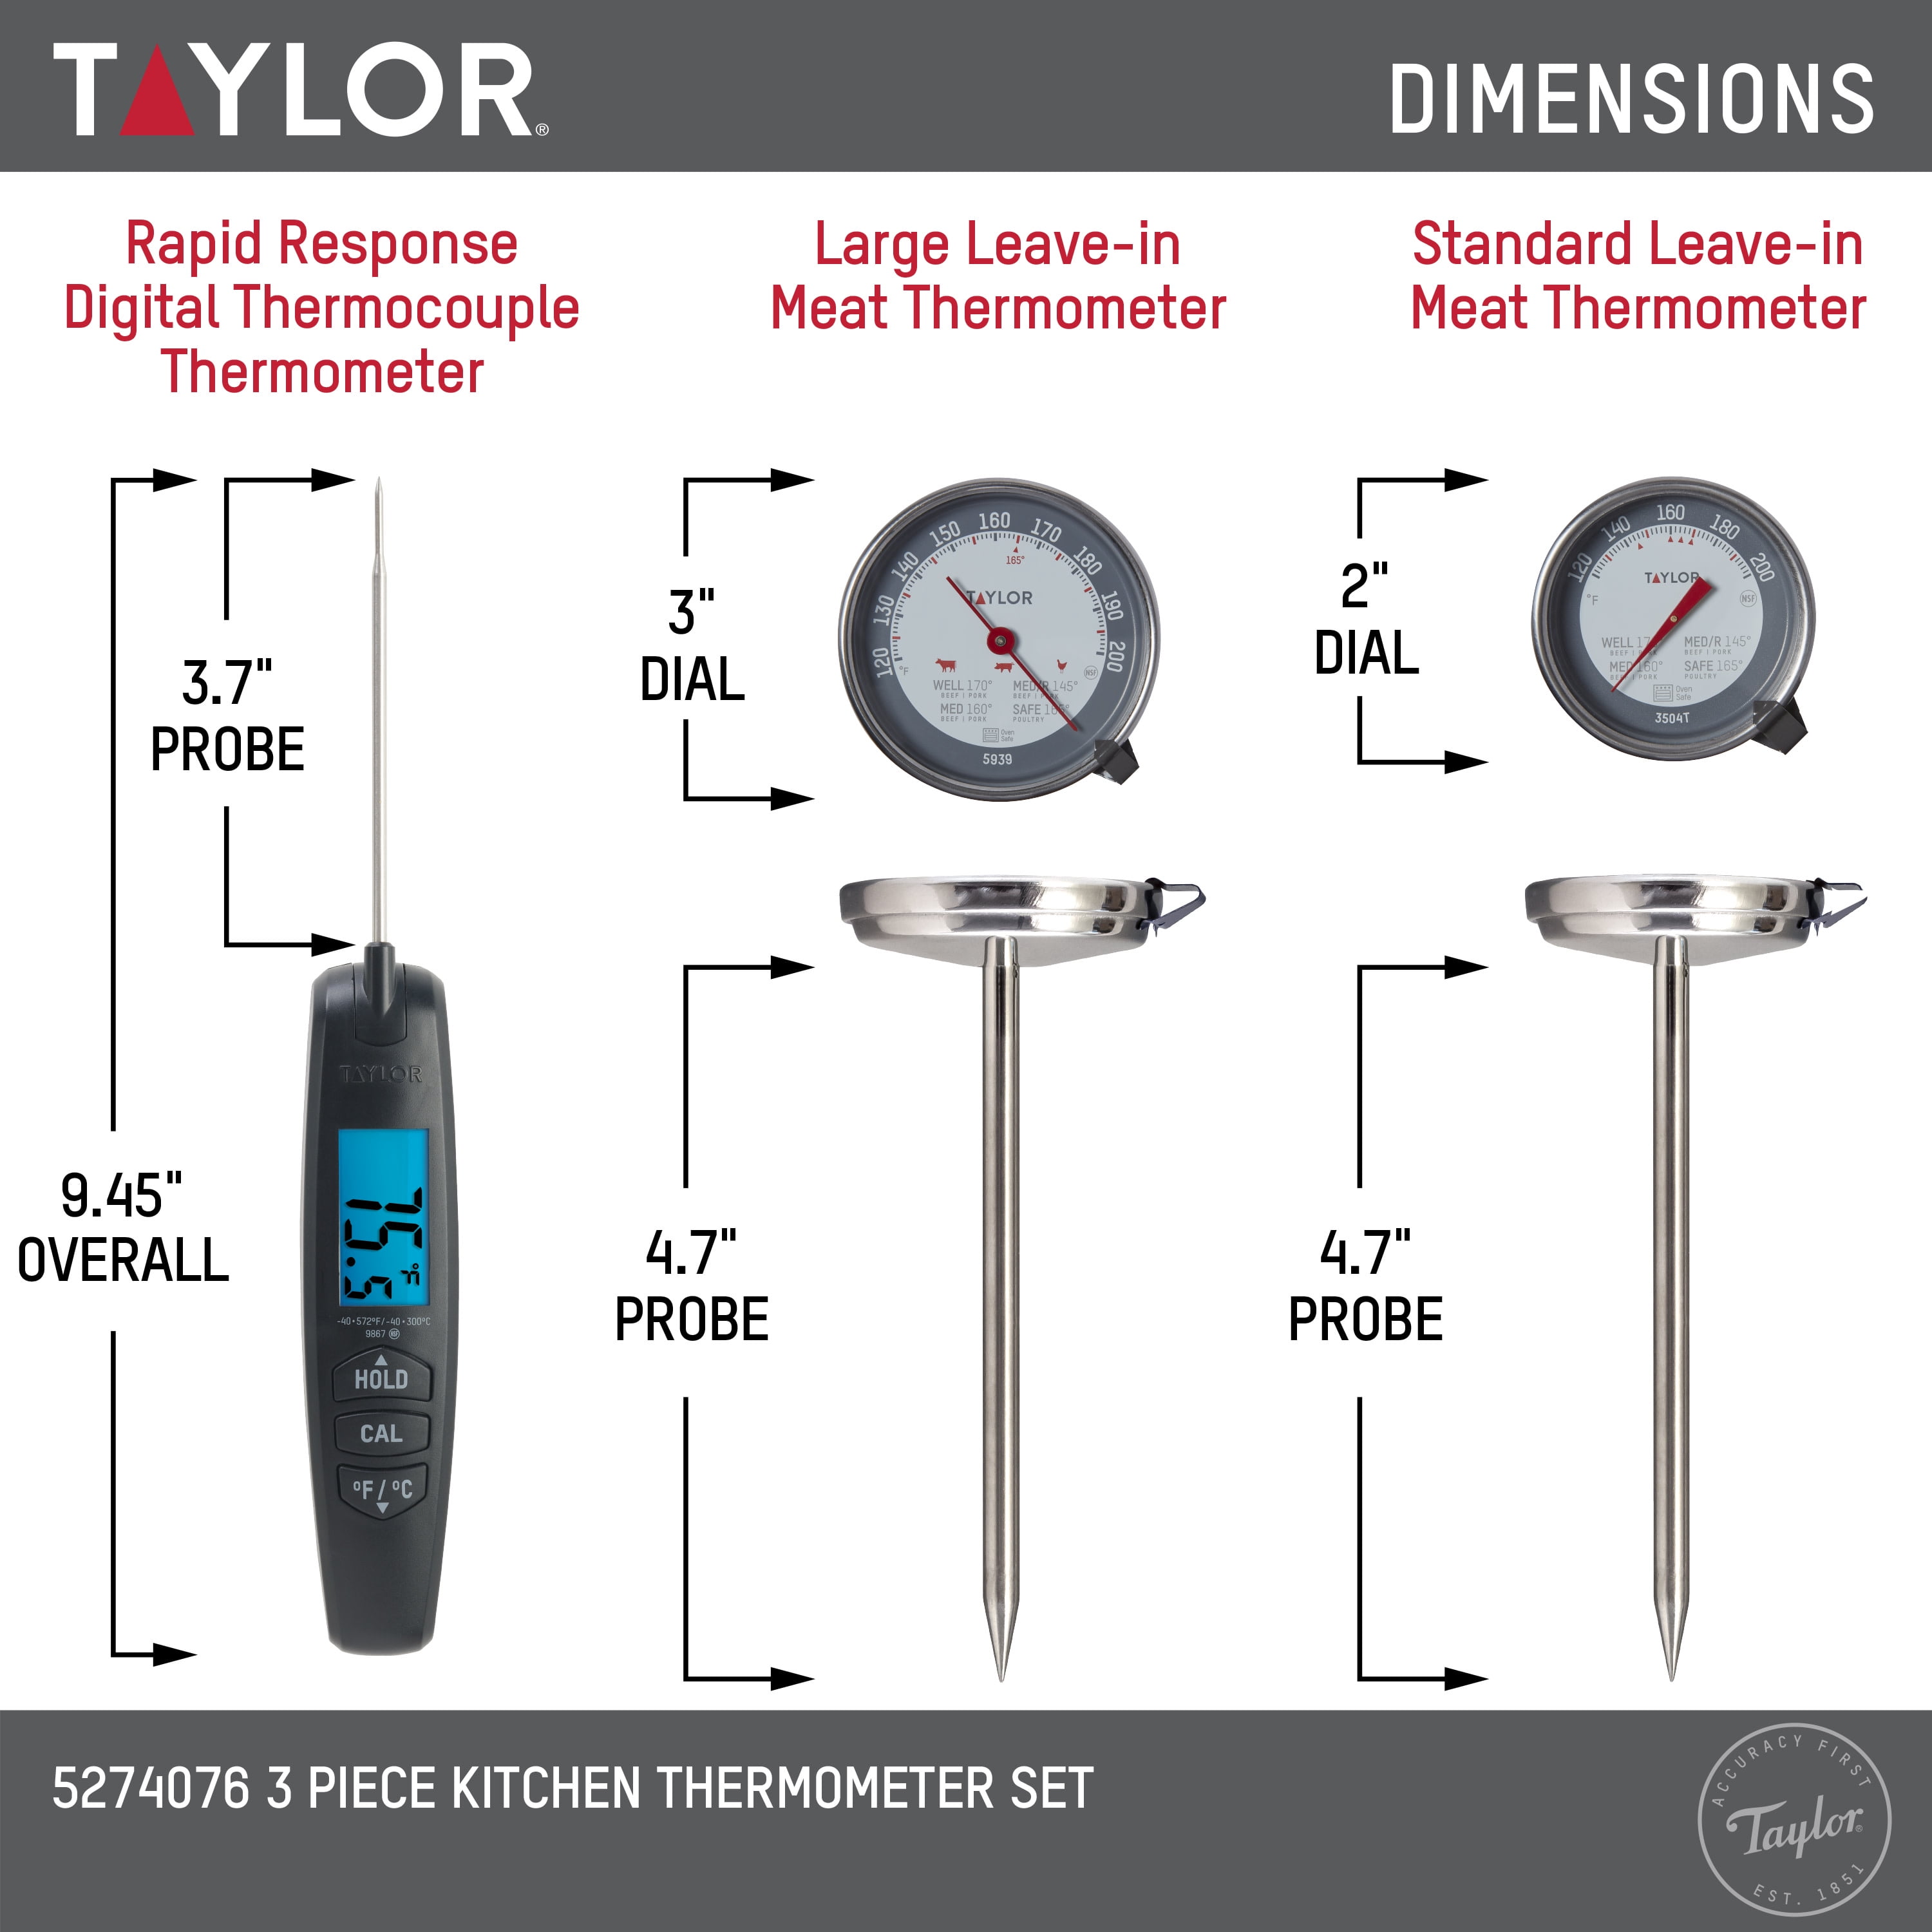 Taylor 3Pc Kitchen and Food Thermometer Set - Includes: 1 Super Fast  Digital Thermocouple Thermometer, 1 Leave-in Oven/Grill-Safe Analog Meat